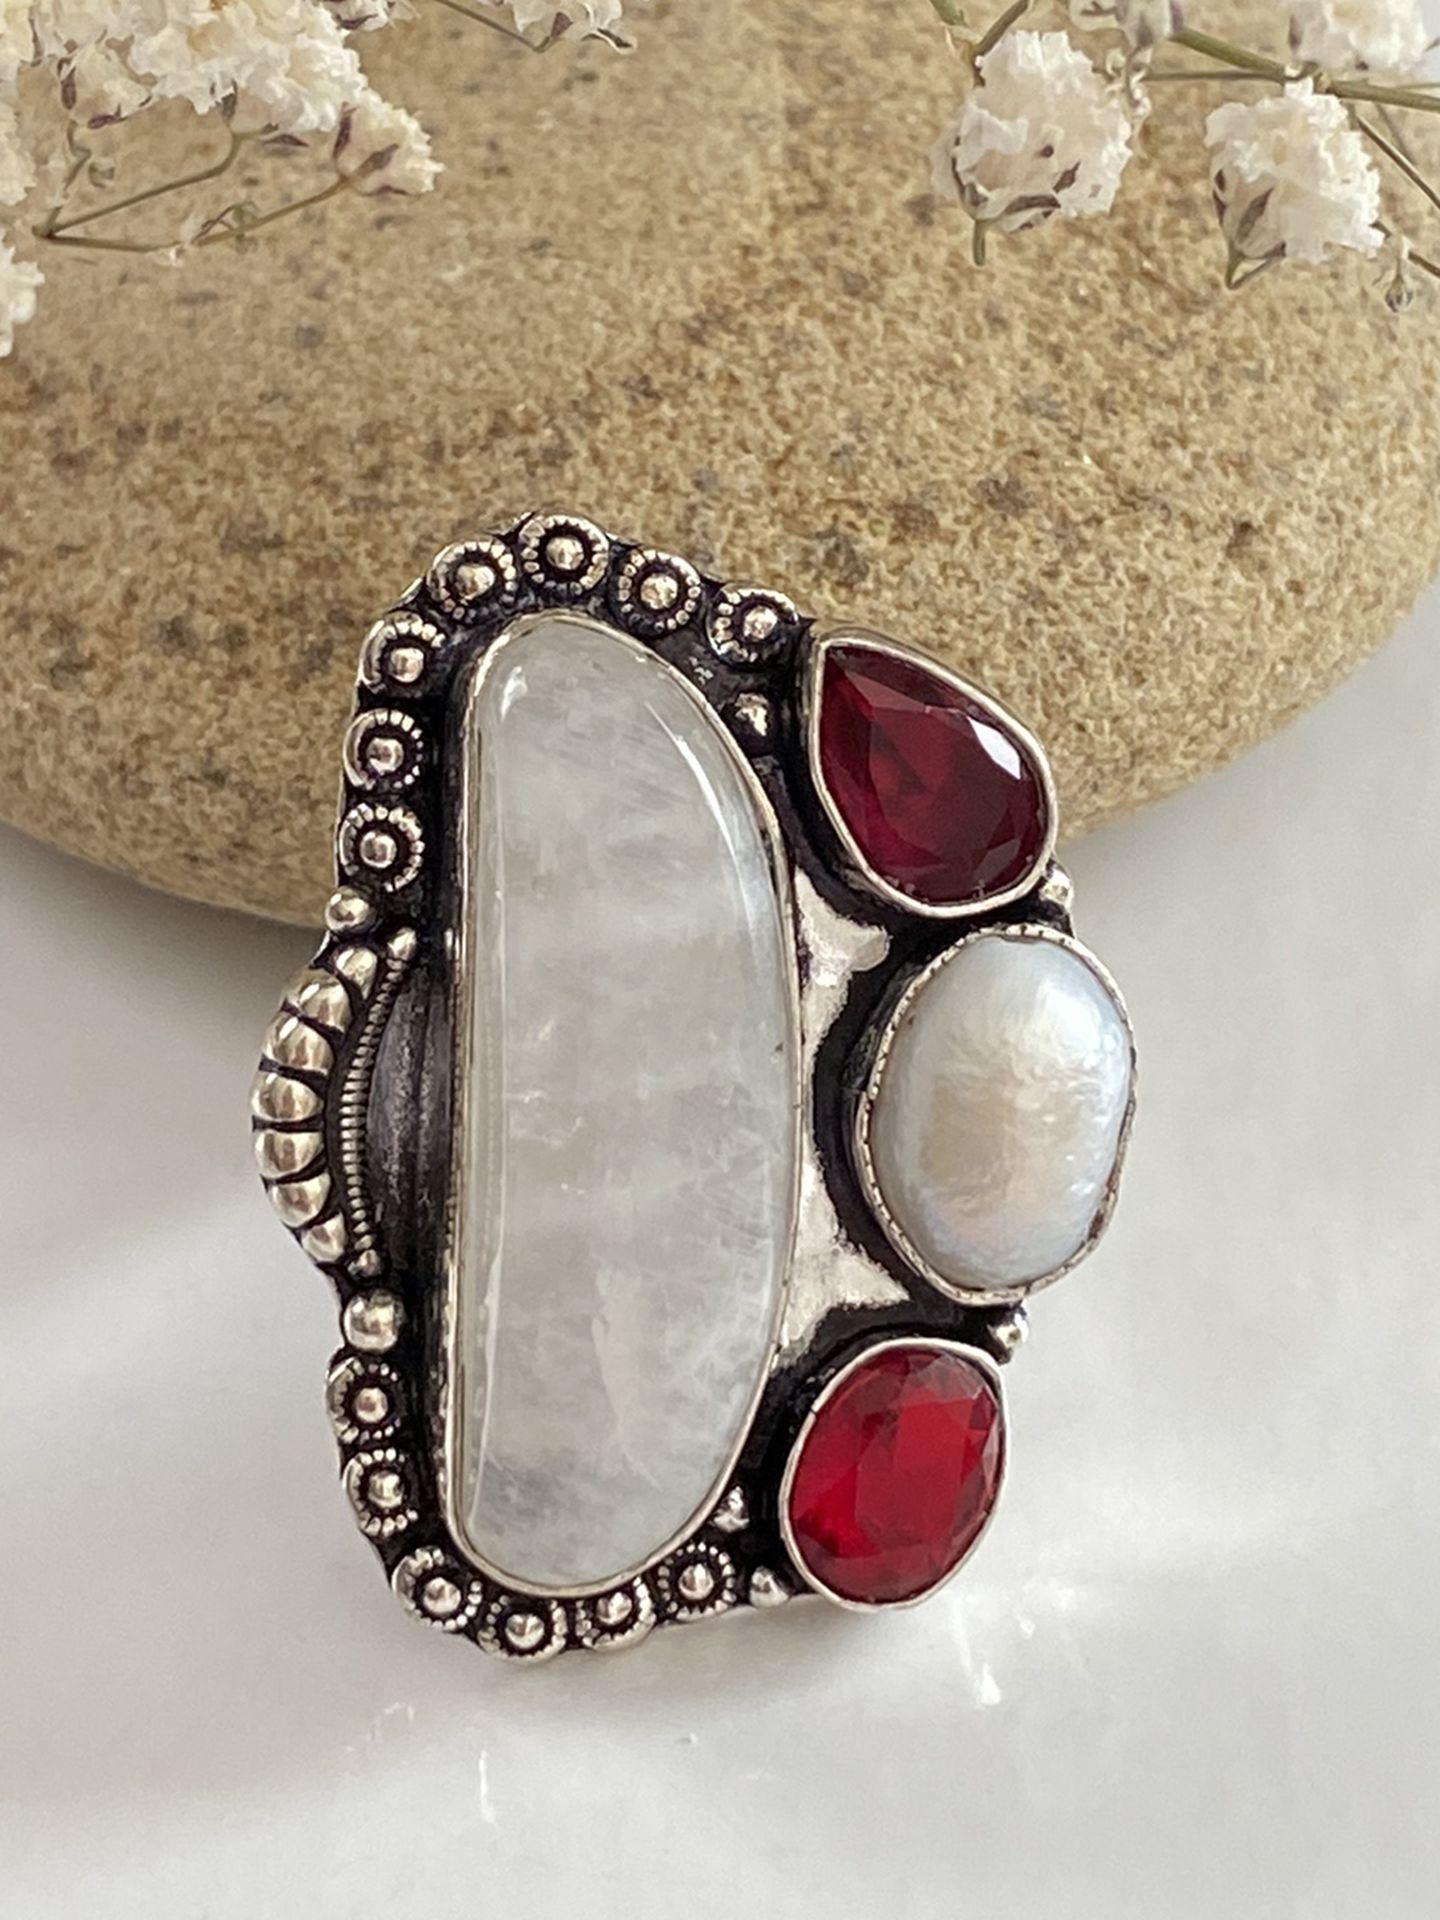 Rainbow Moonstone, garnet and biwa pearl handcrafted 925 sterling silver overlay ring size 10